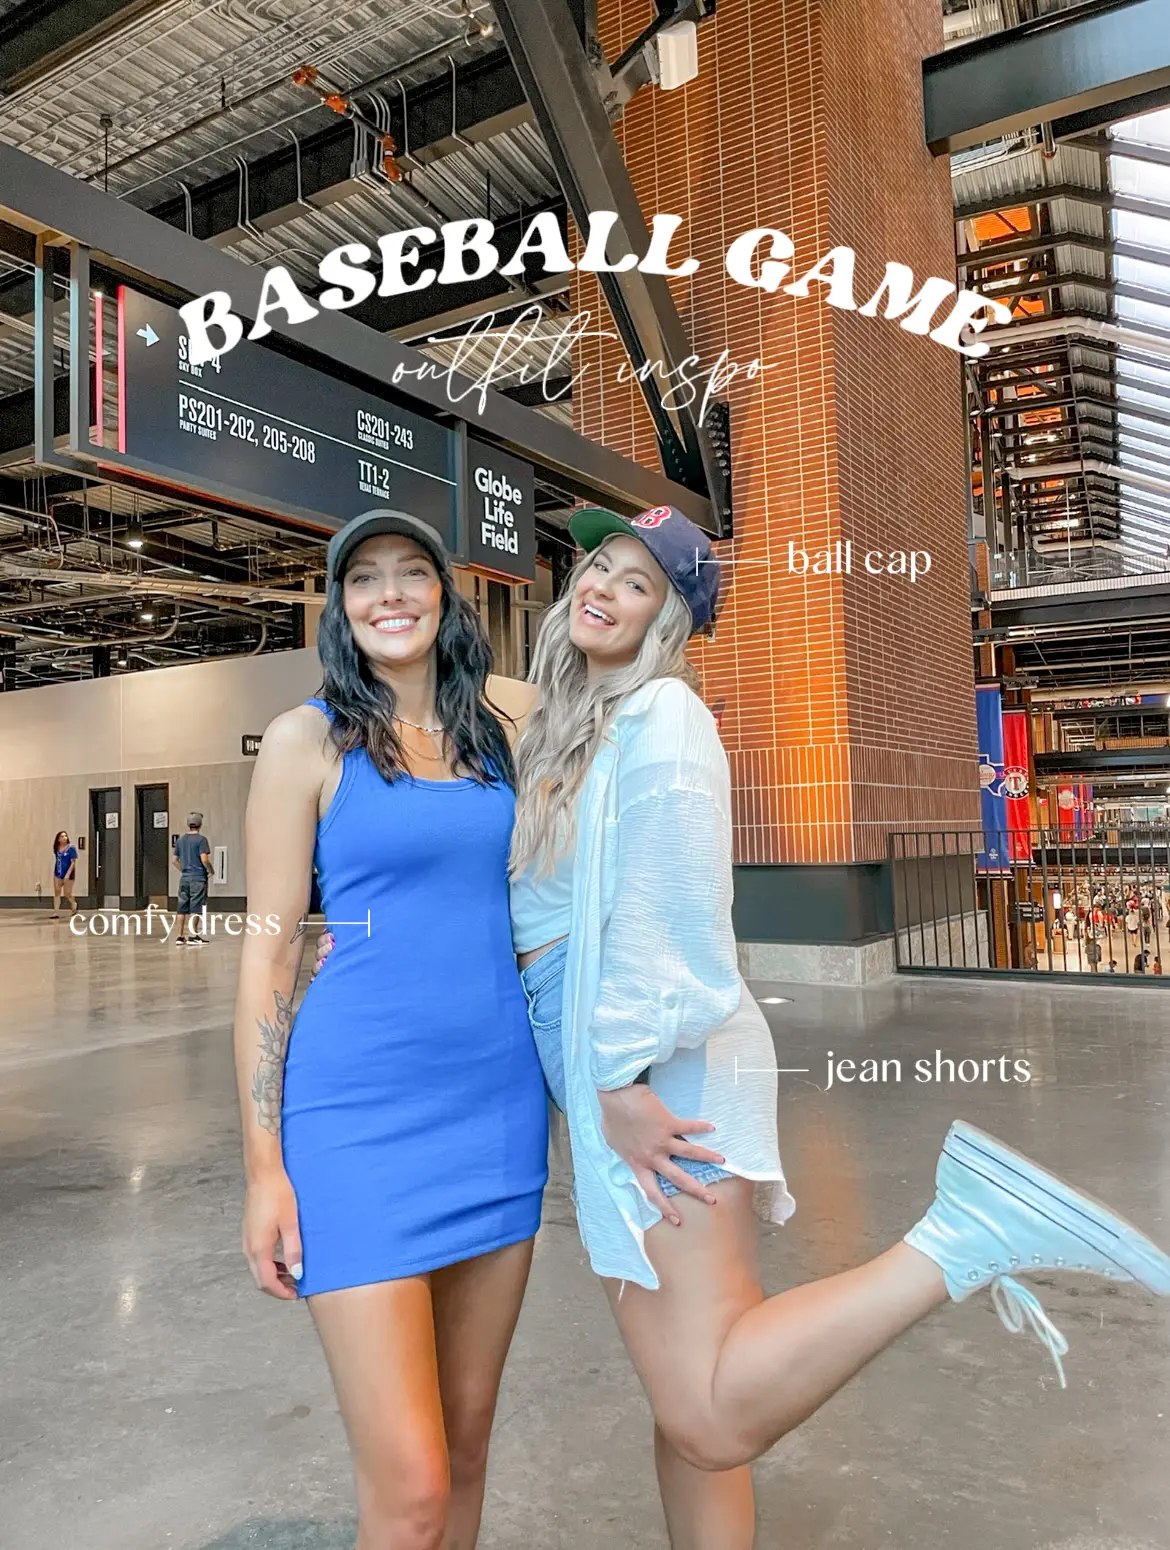 baseball game outfit inspo⚾️  Gallery posted by kenzie_adams99